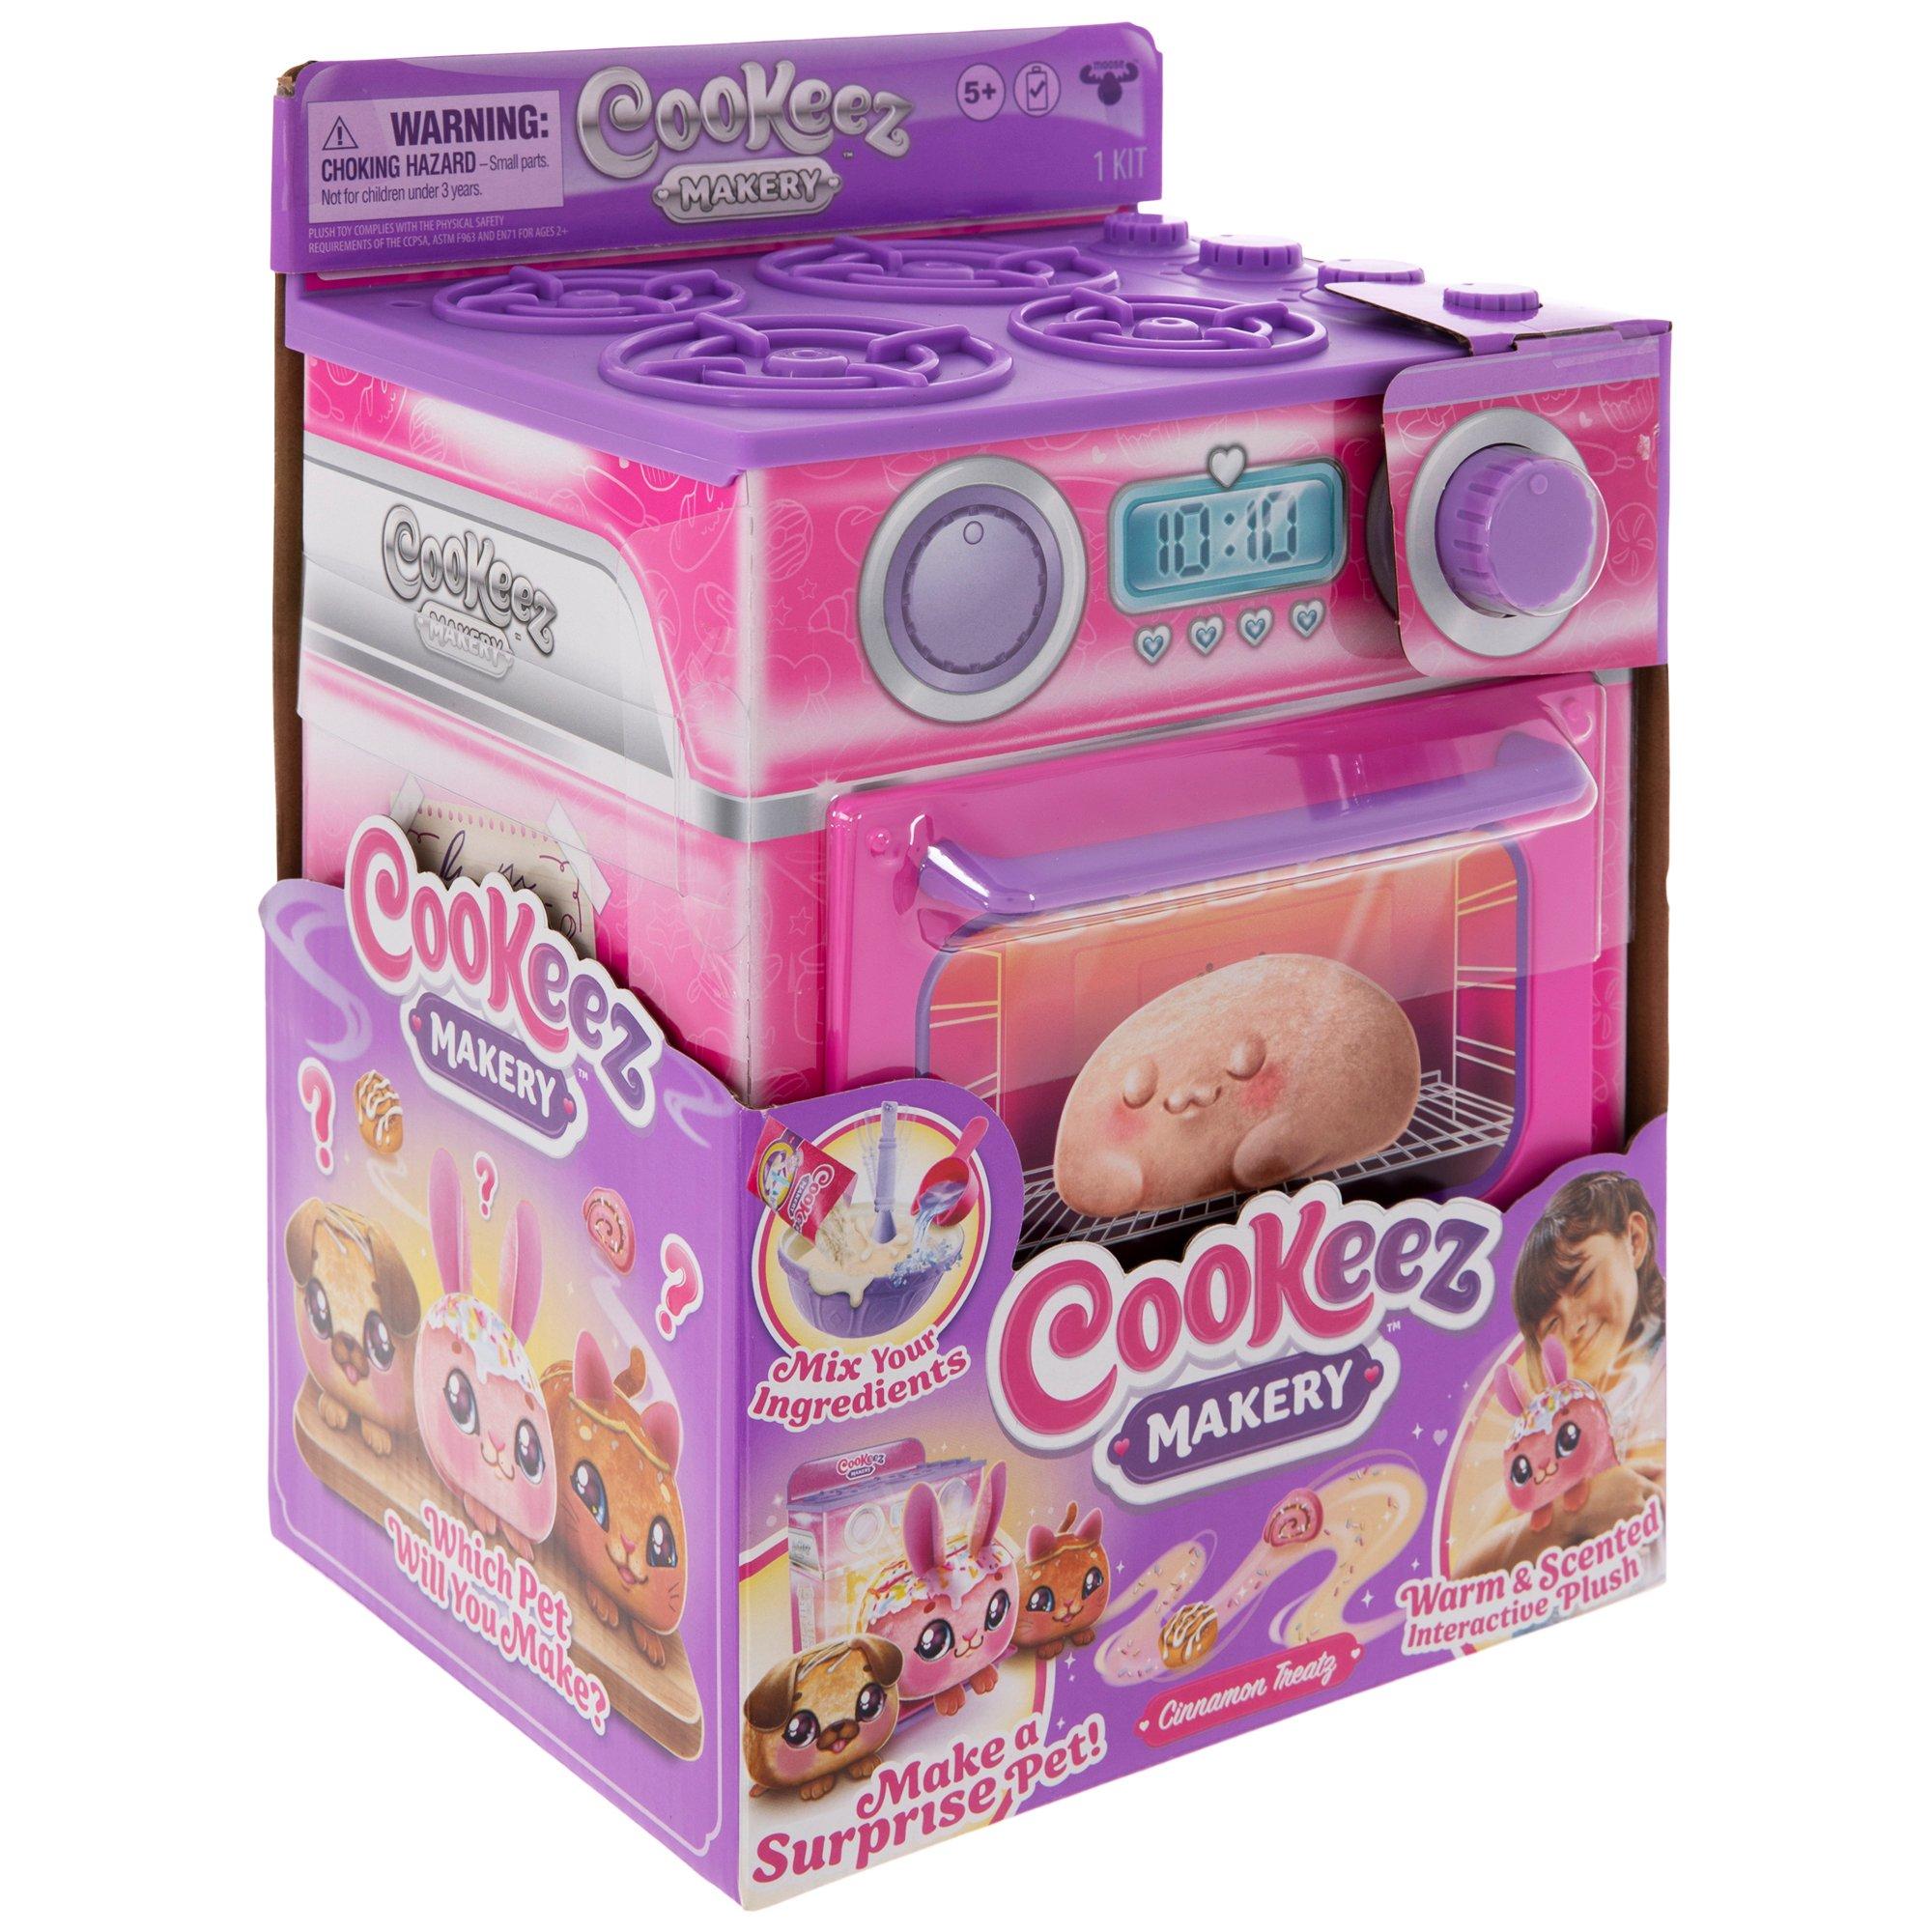 Cookeez Makery: How Does It Work And Where to Find Discounts - The